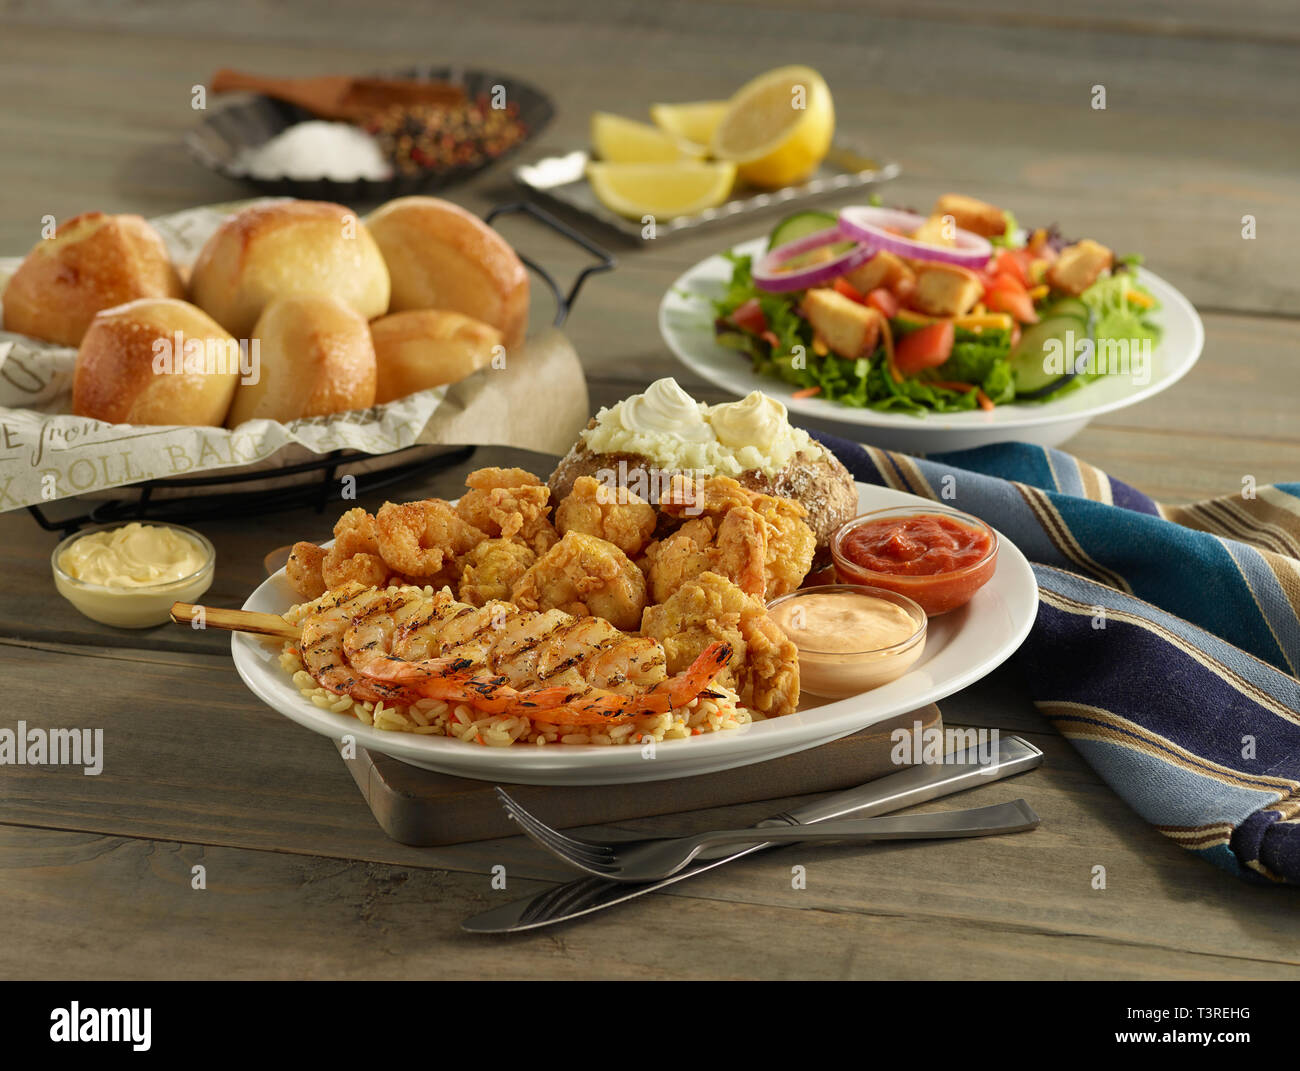 Fried and grilled shrimp dinner platter with baked potato, salad, and rolls Stock Photo